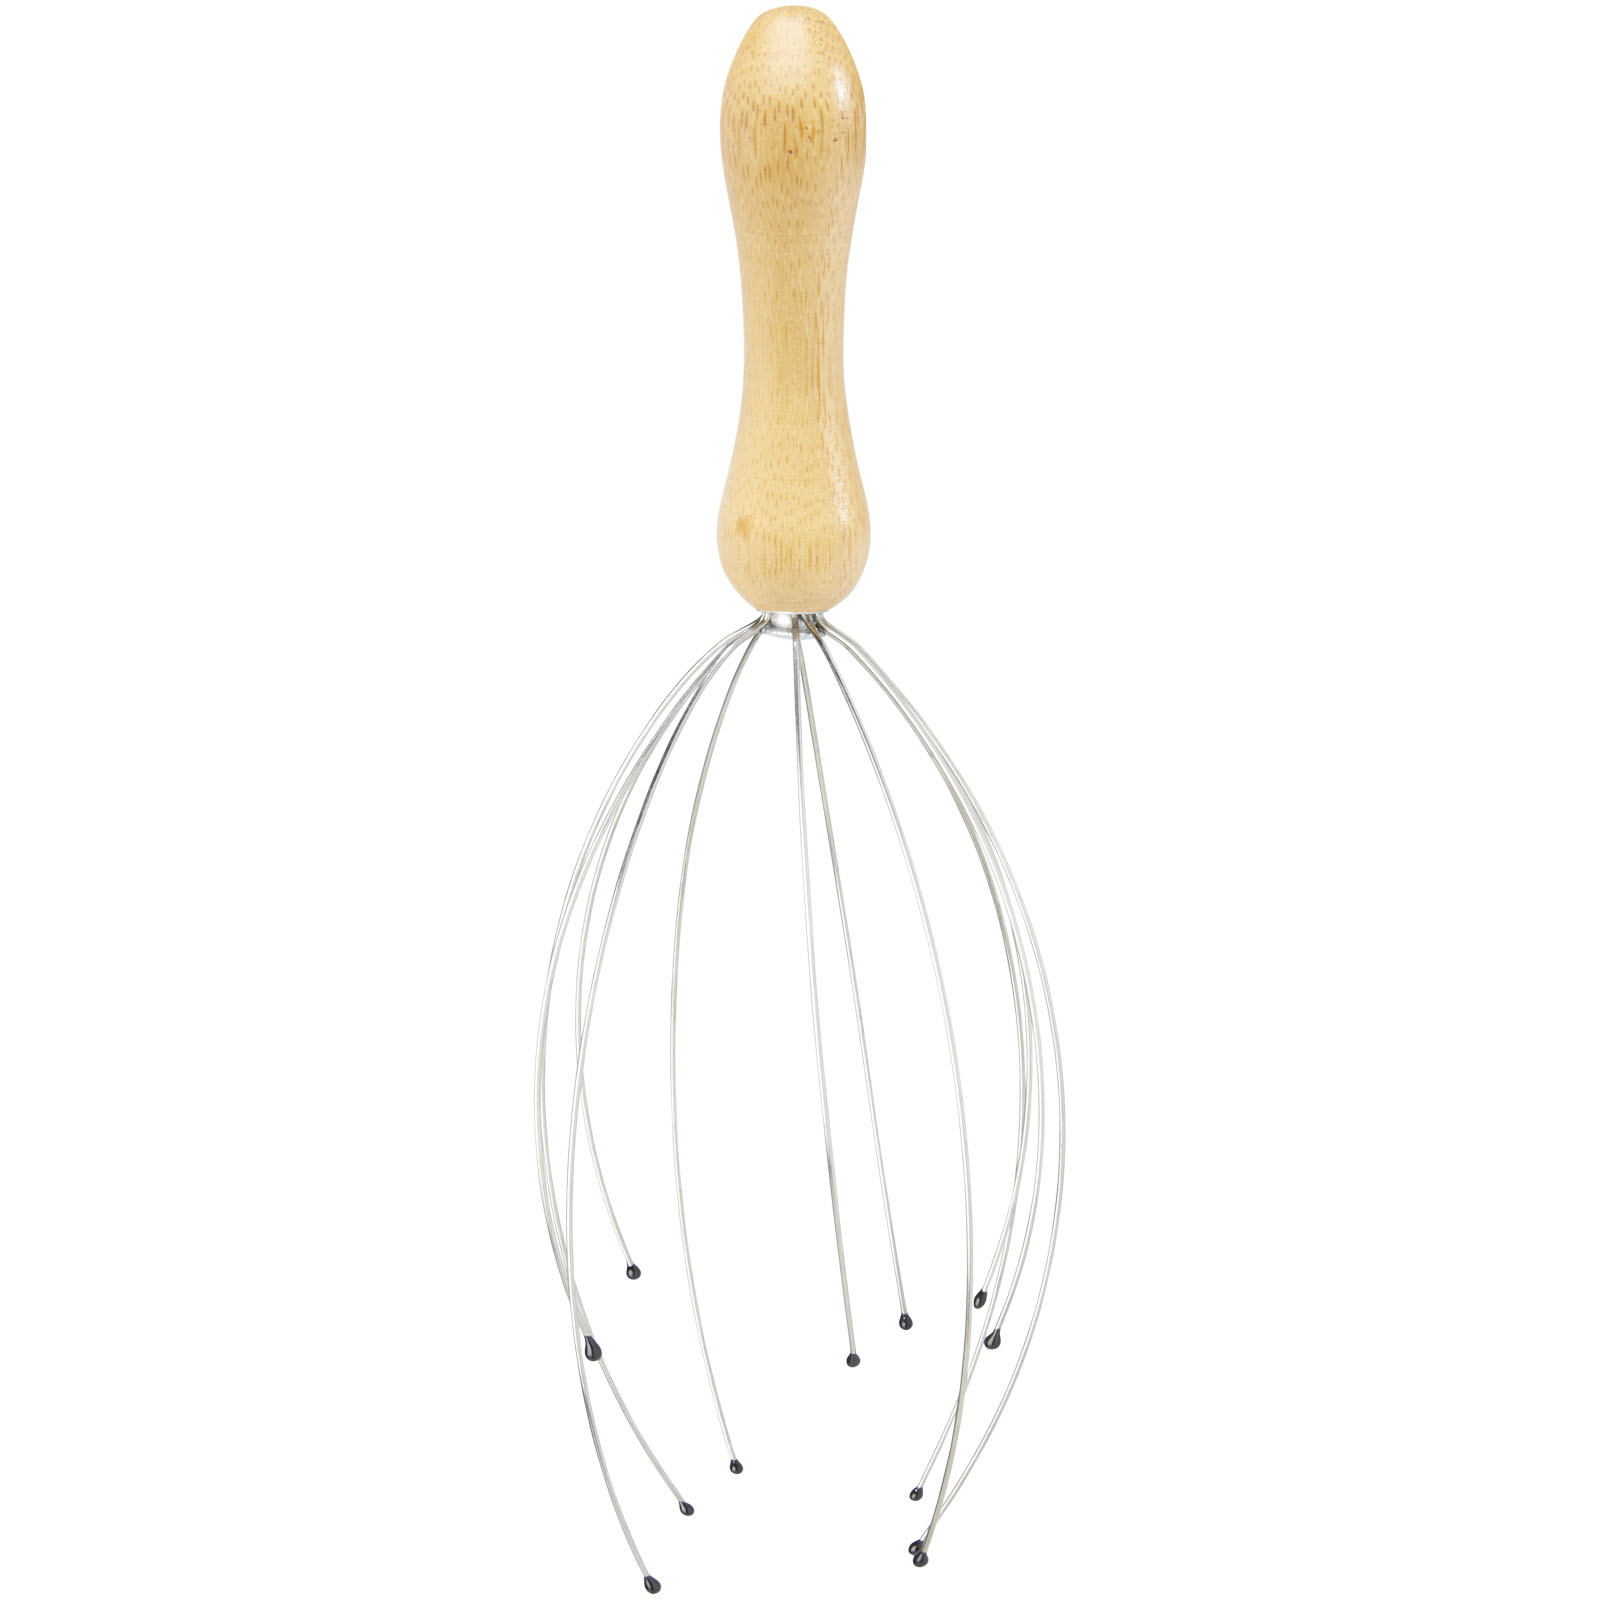 Advertising Personal Care - Hator bamboo head massager